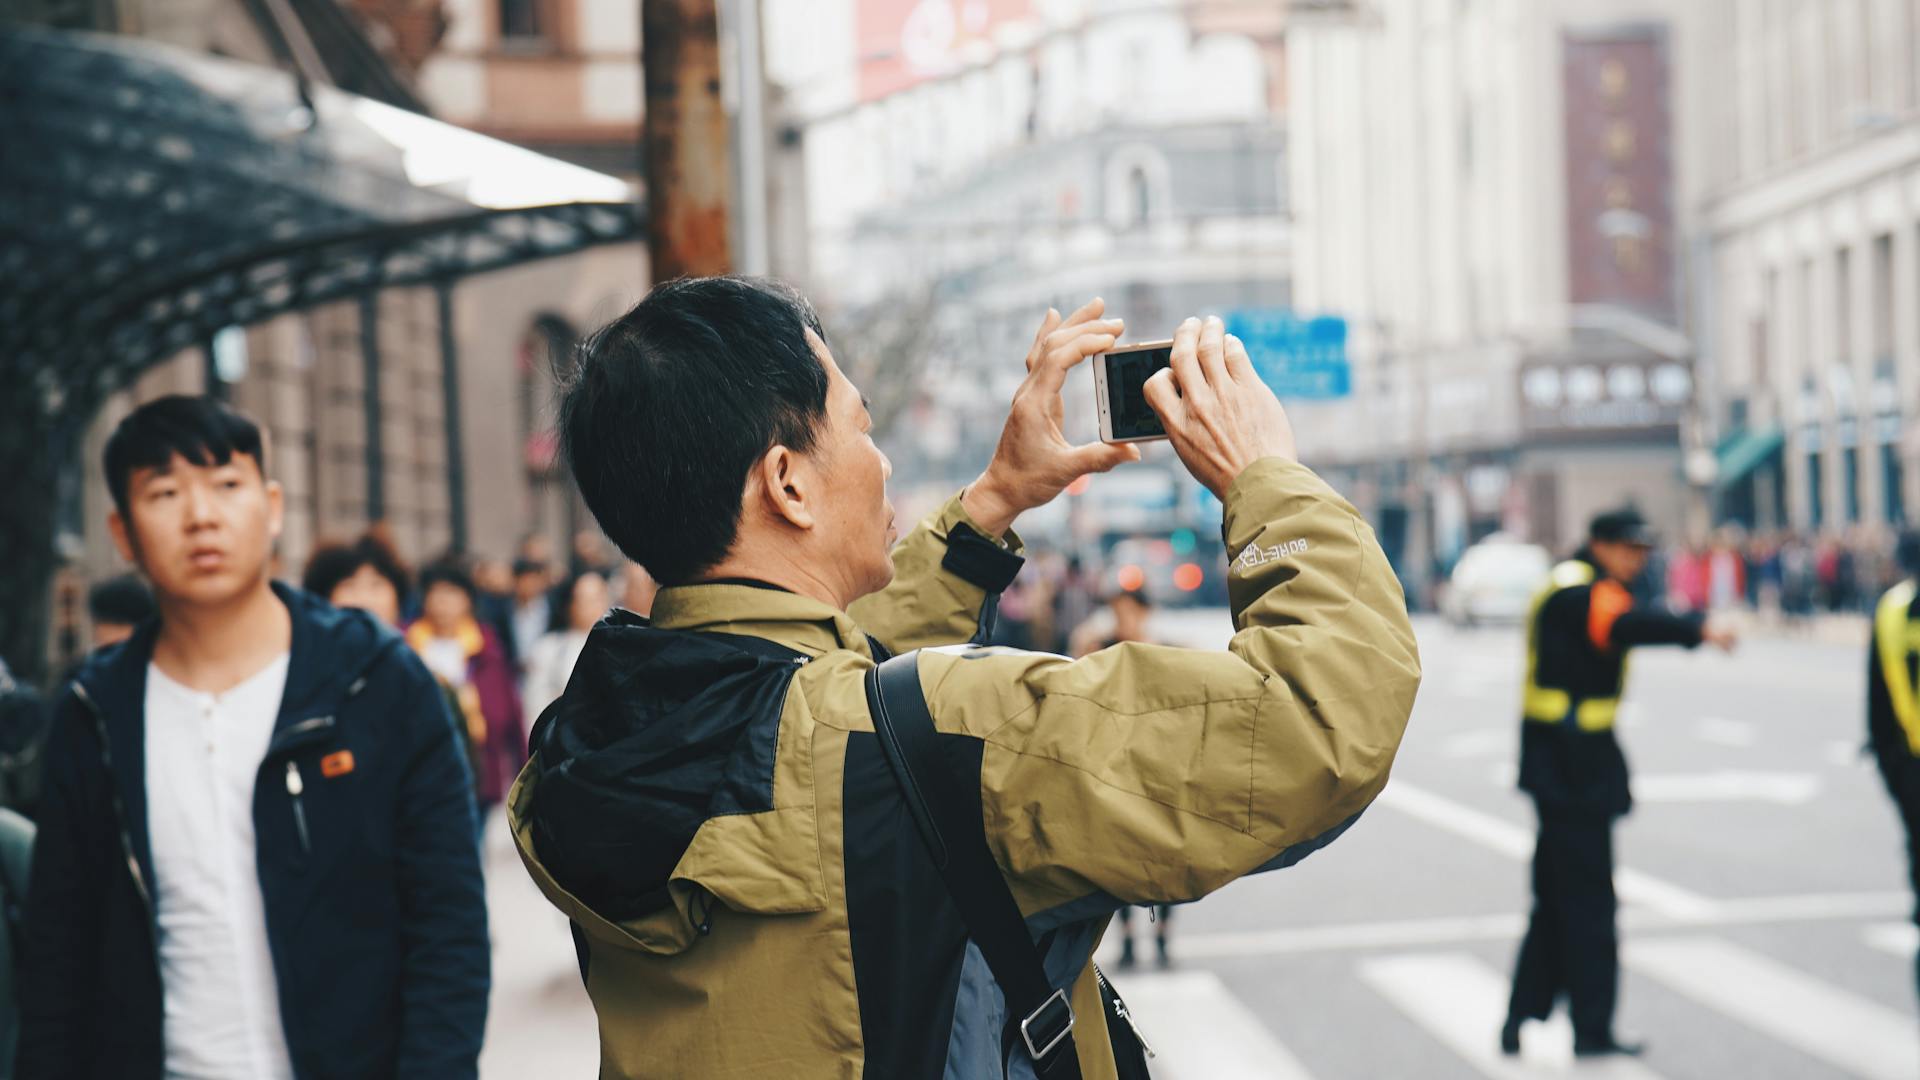 A man taking a photo in a street in China.